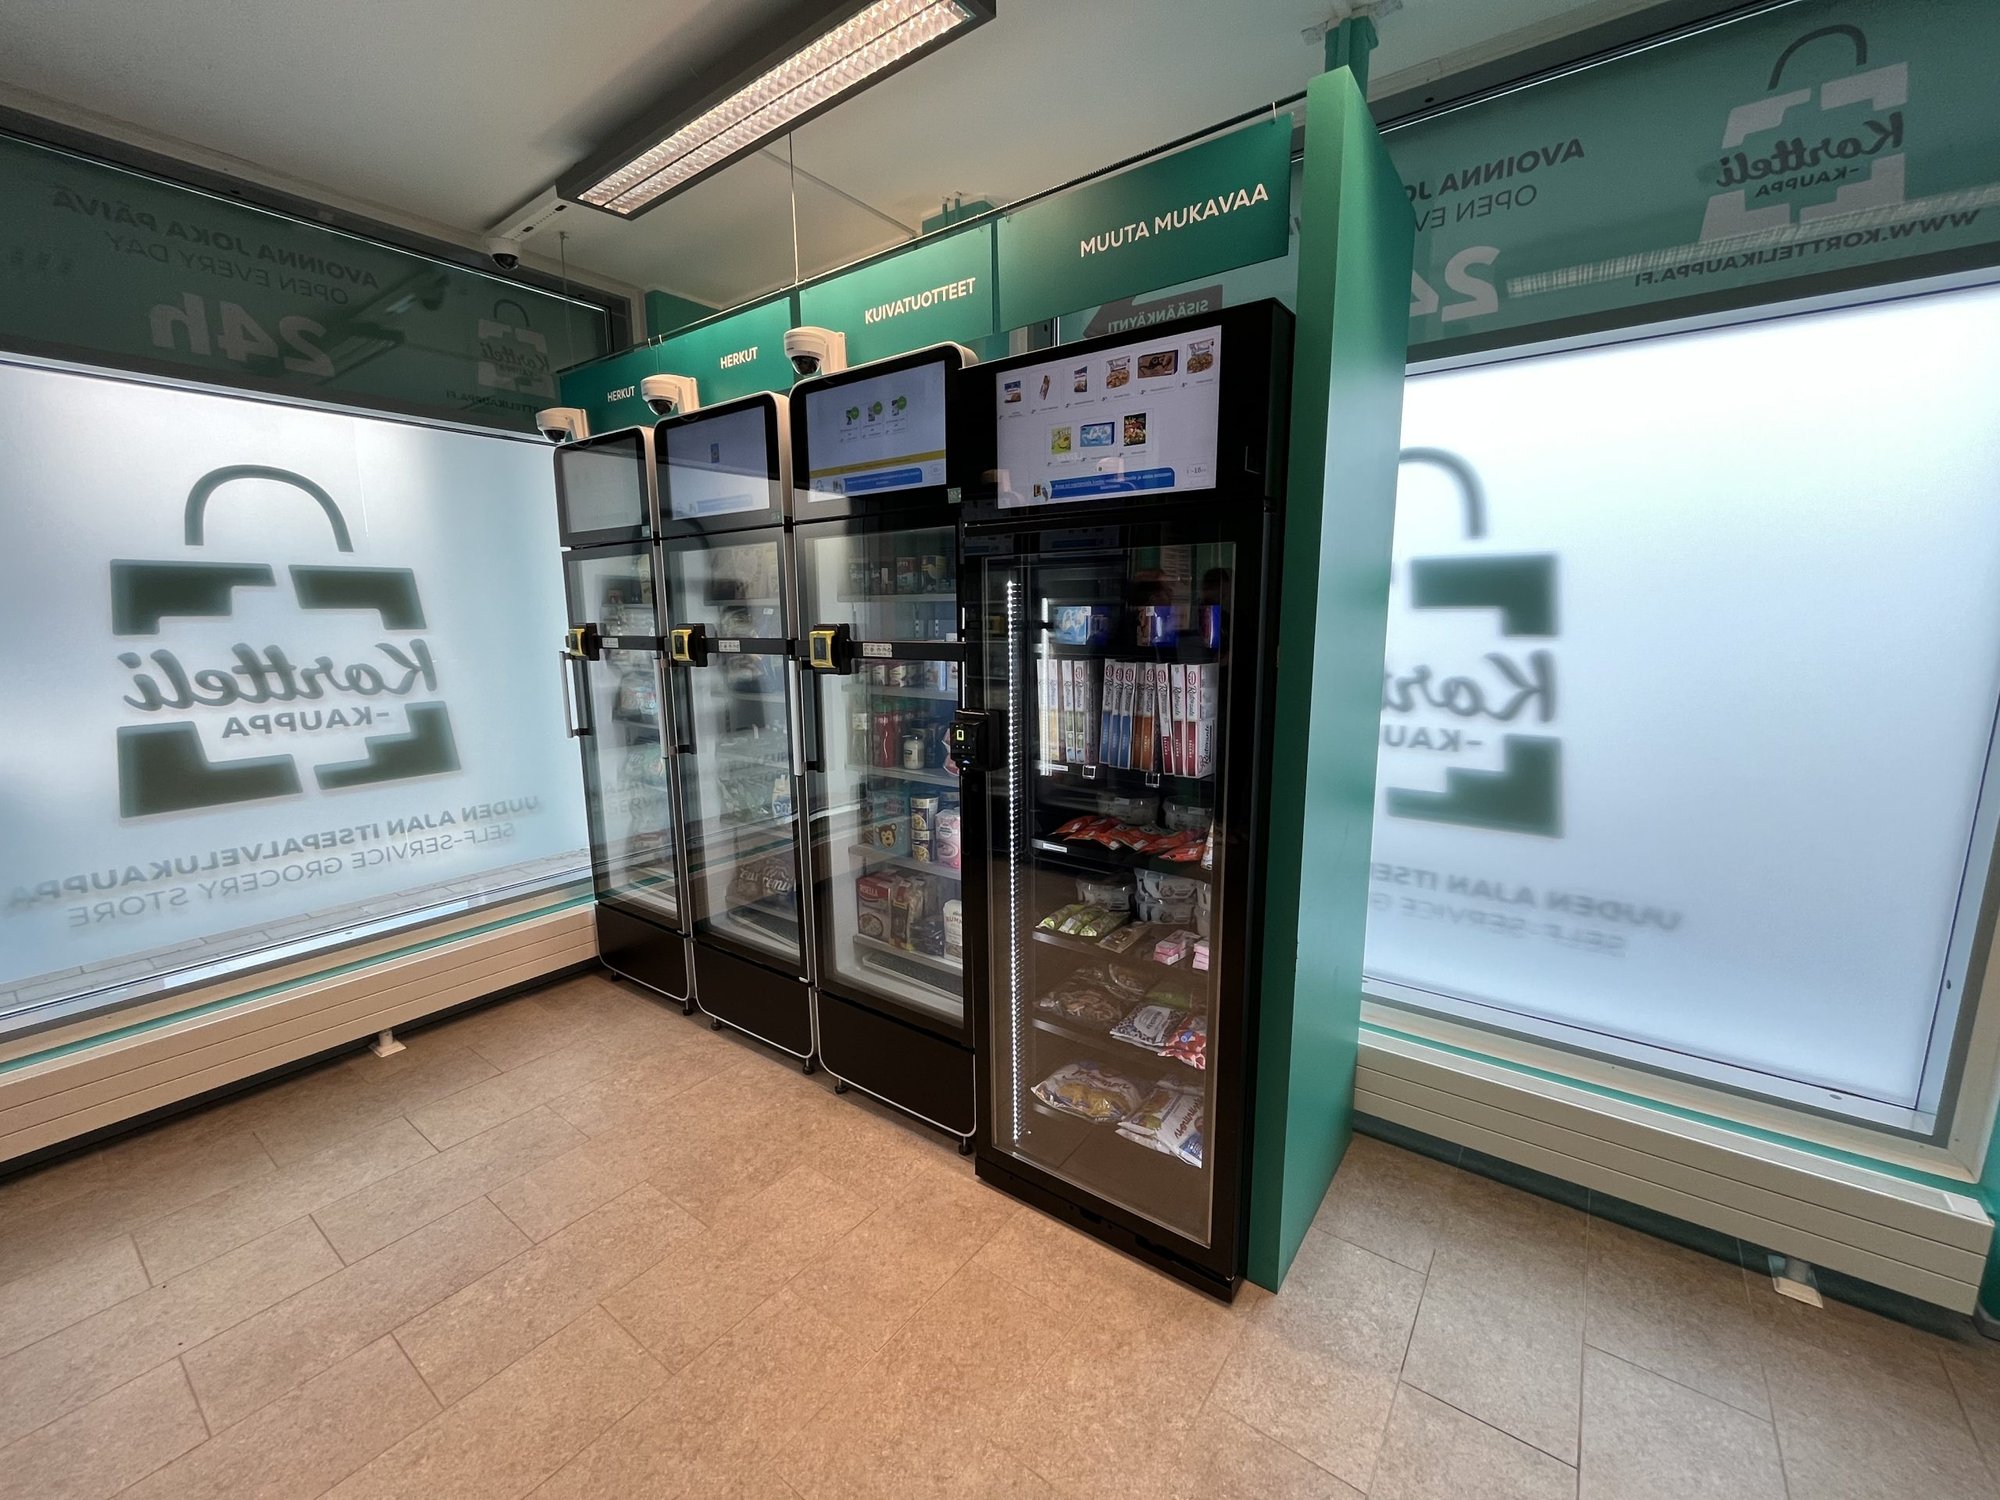 Four smart vending machines in a convenience store